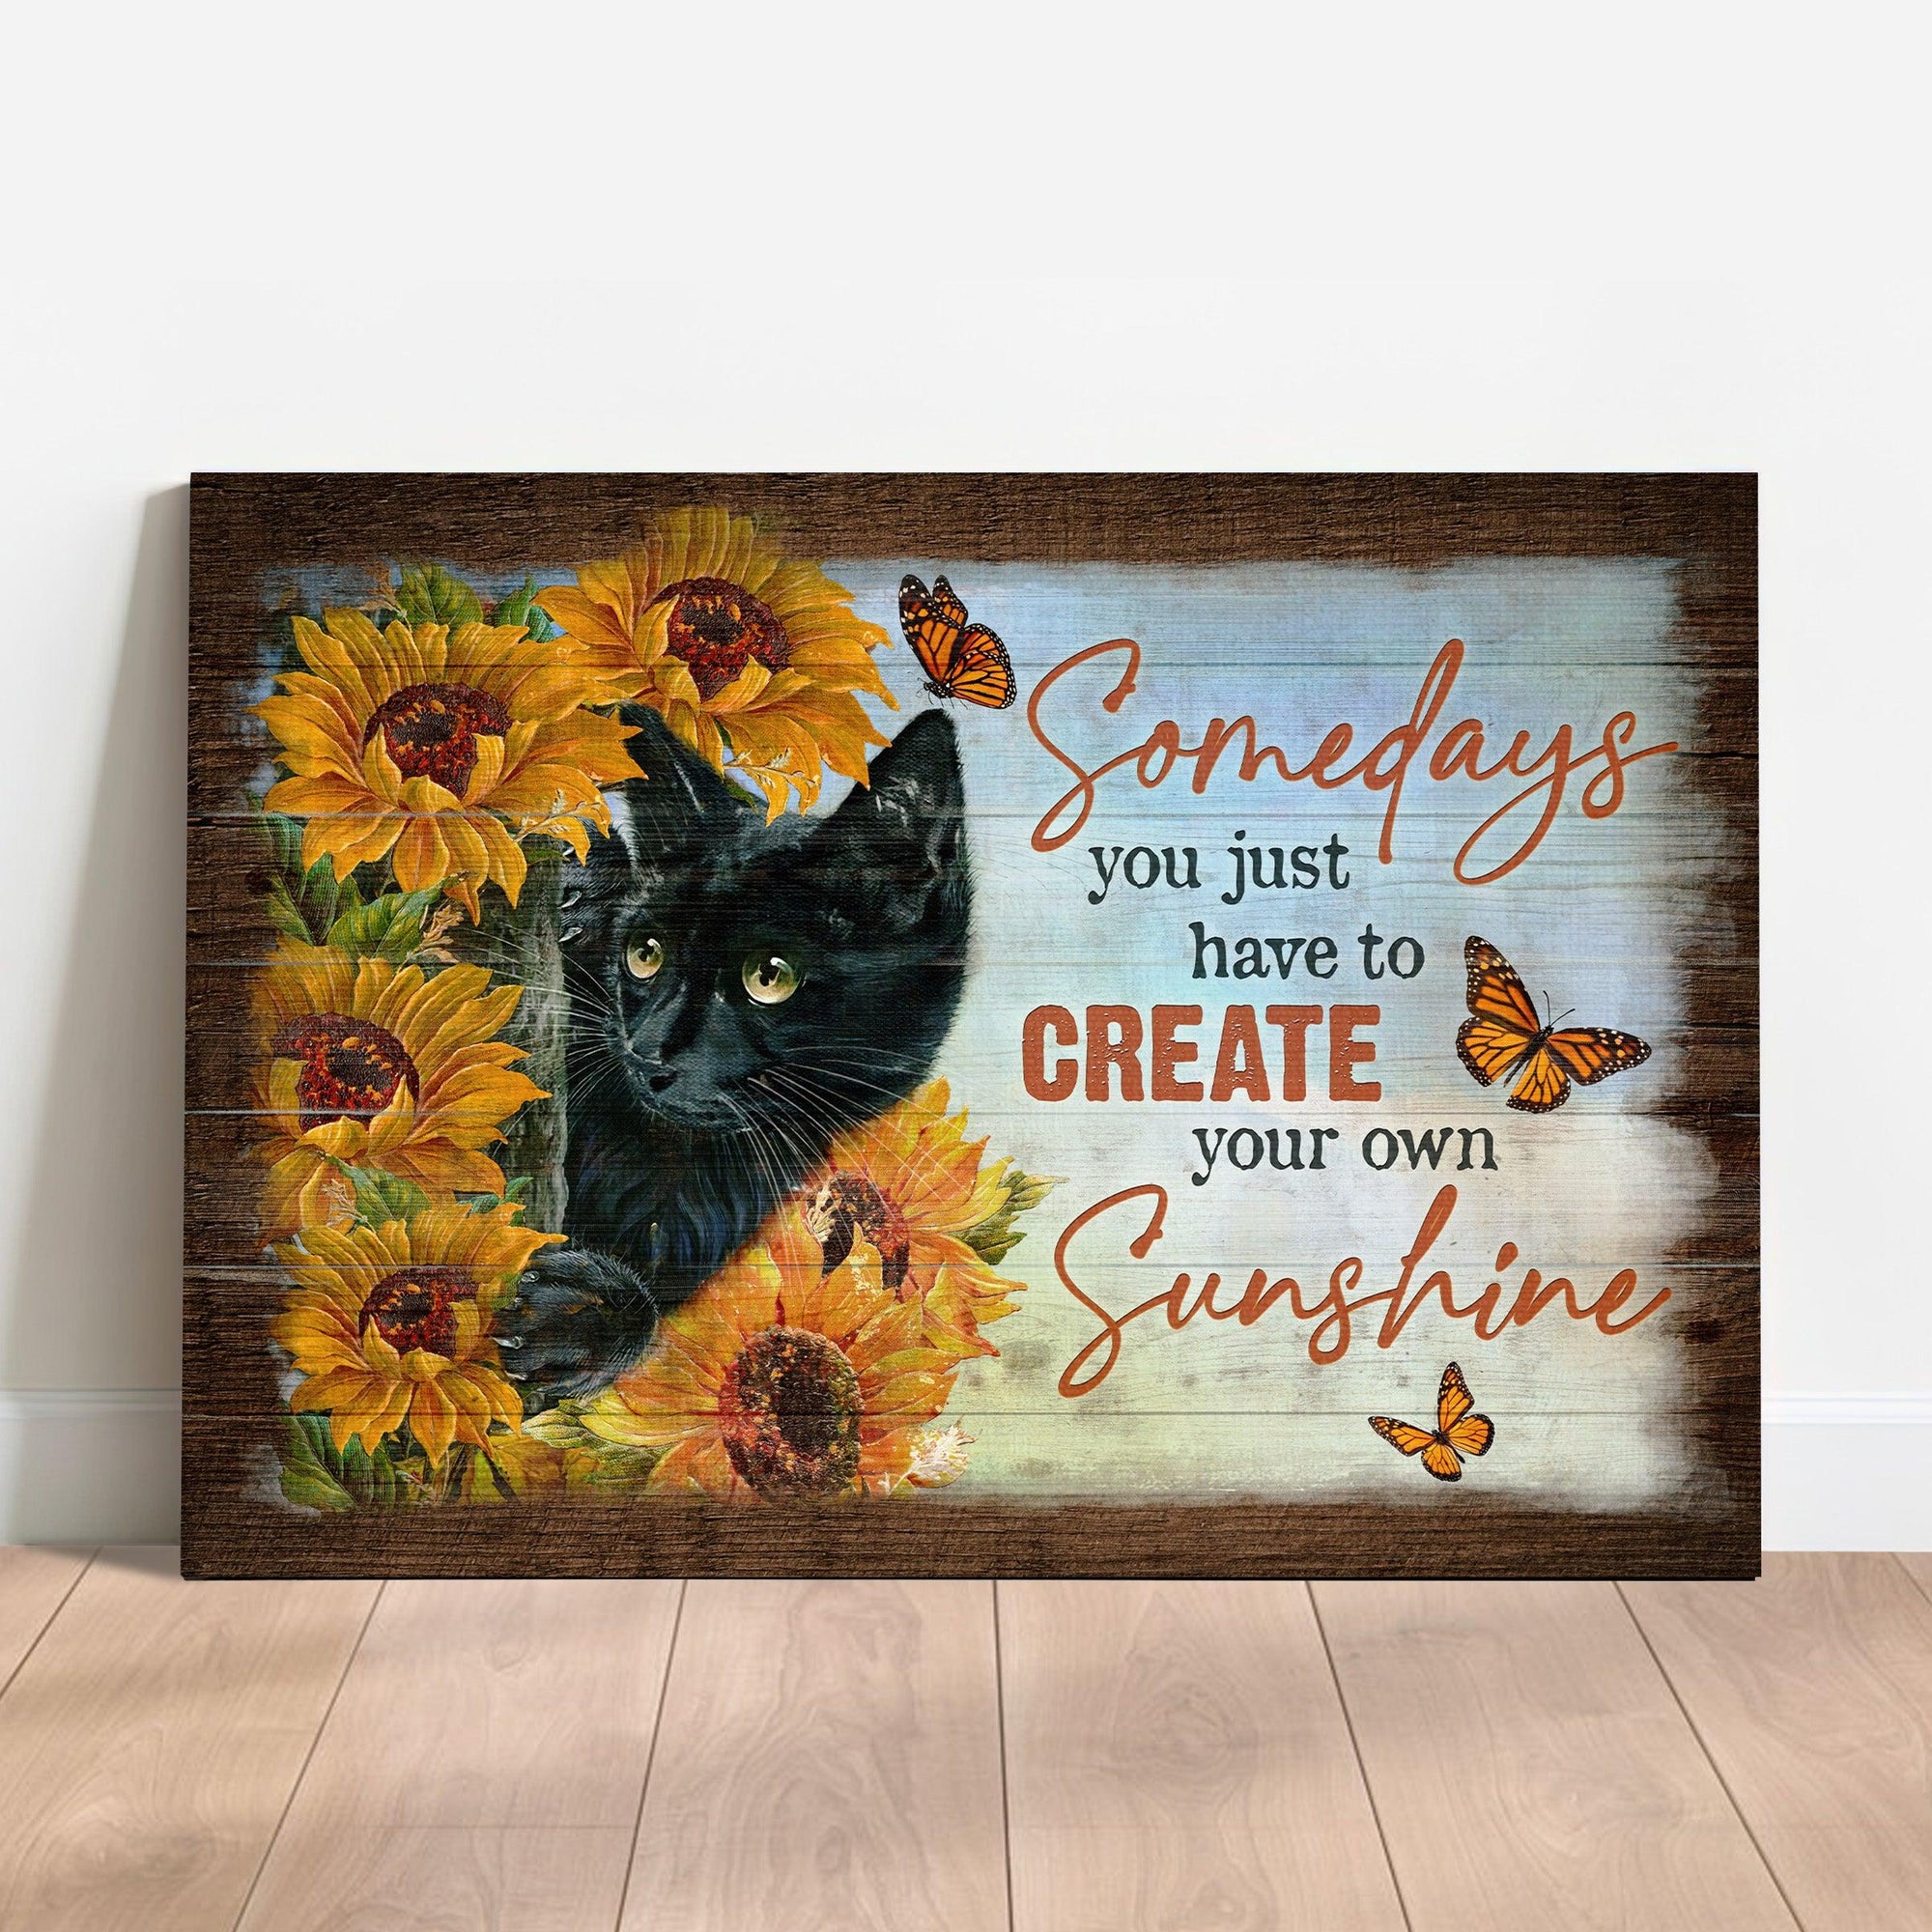 Black Cat & Jesus Premium Wrapped Landscape Canvas - Black Cat, Sunflower Field, Somedays You Just Have To Create - Gift For Cat Lovers, Christian - Amzanimalsgift